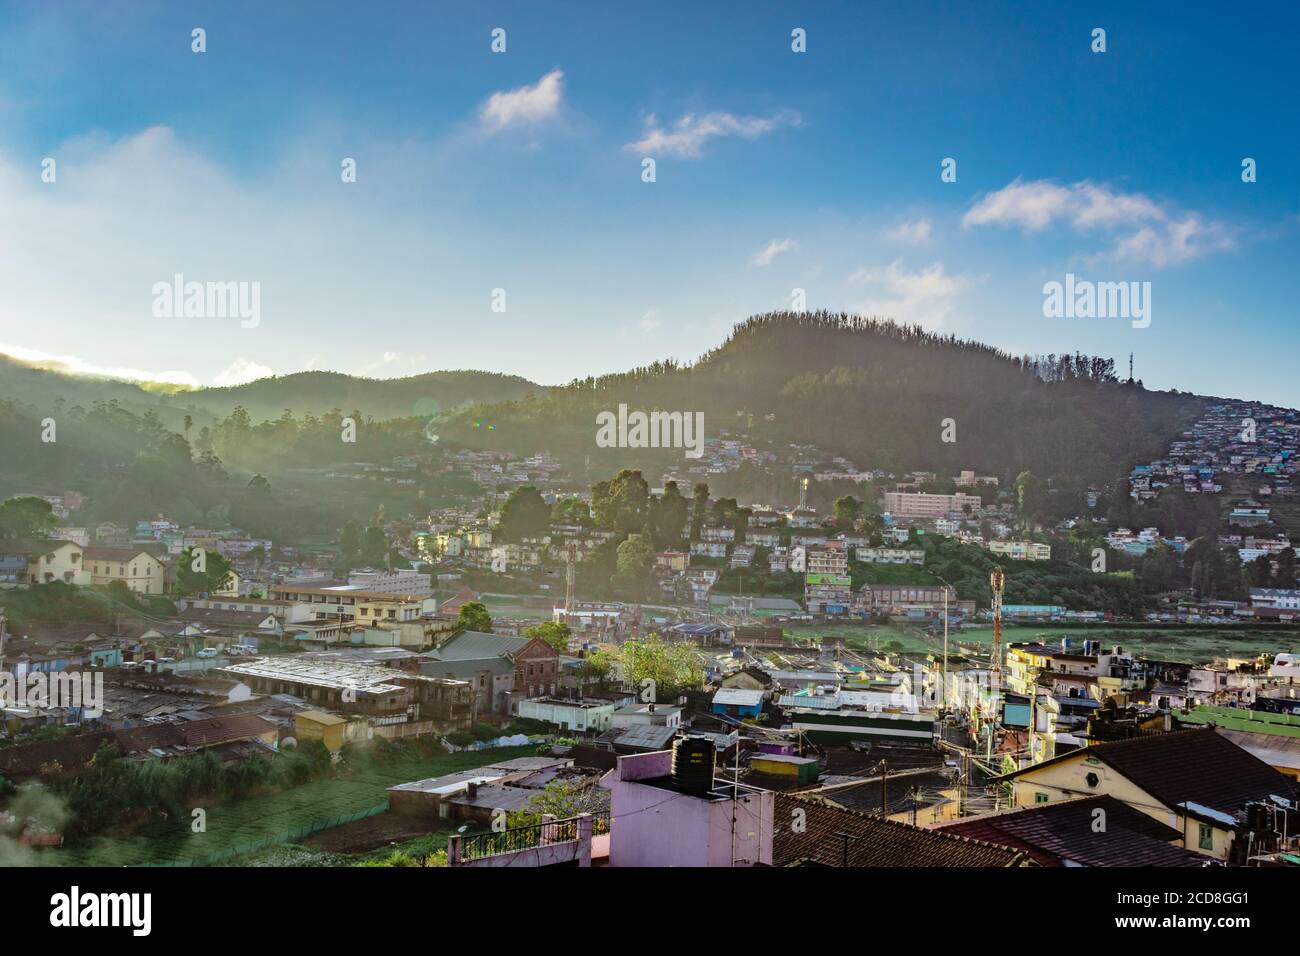 city view with mountain and bright blue sky from hill top at dawn image is taken from doddabetta peak ooty india. it is showing the bird eye view of o Stock Photo